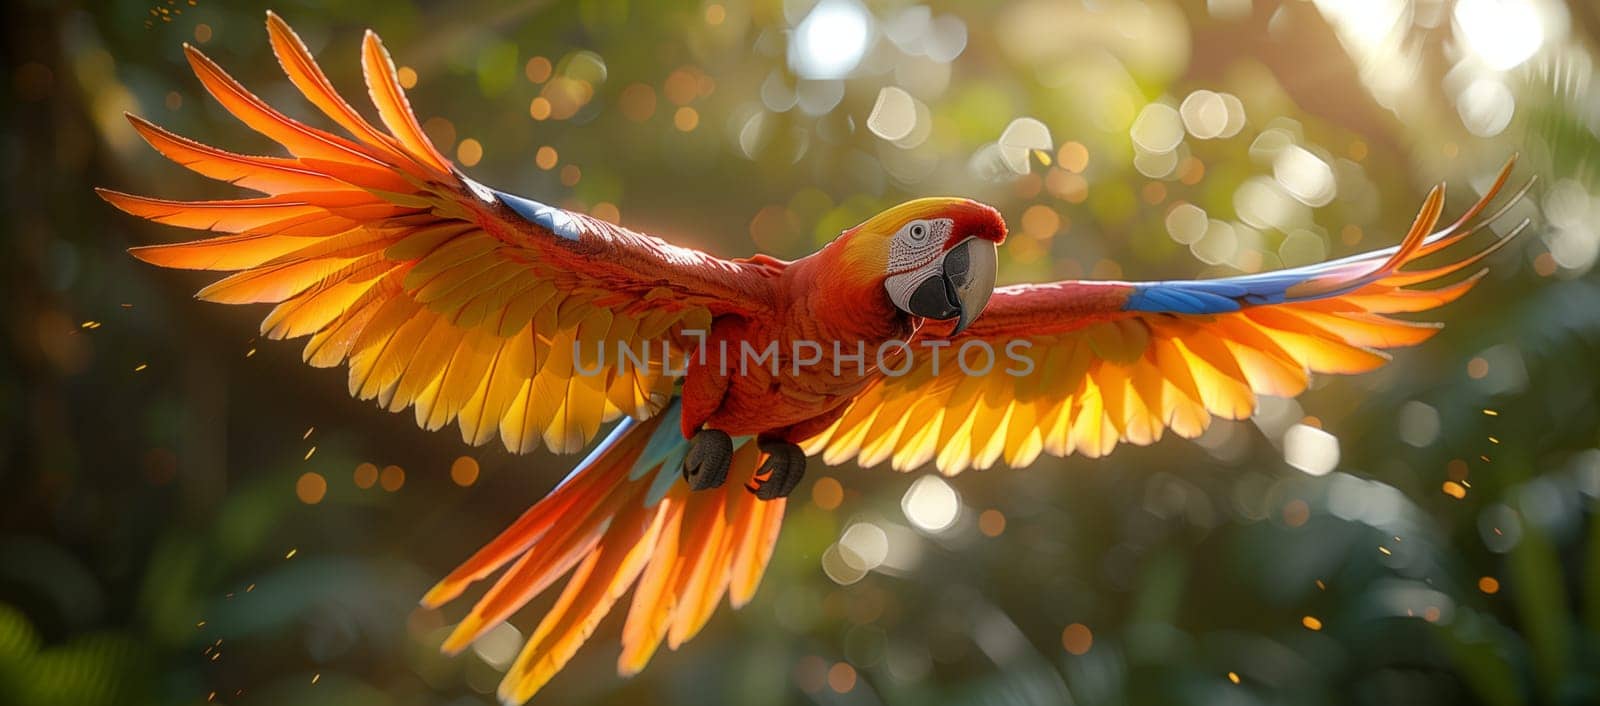 A colorful parrot with spread wings flying through the air by richwolf